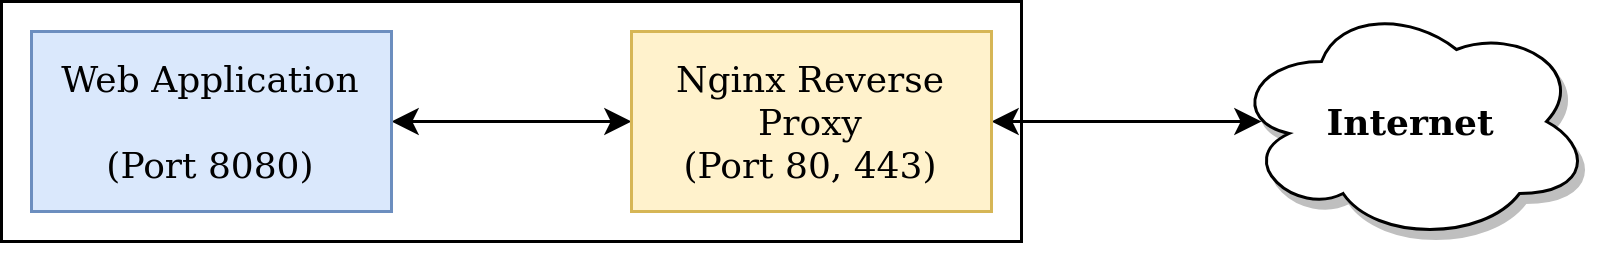 A flow-chart like diagram of a web application connected to a nginx reverse proxy, which is connected to the internet.